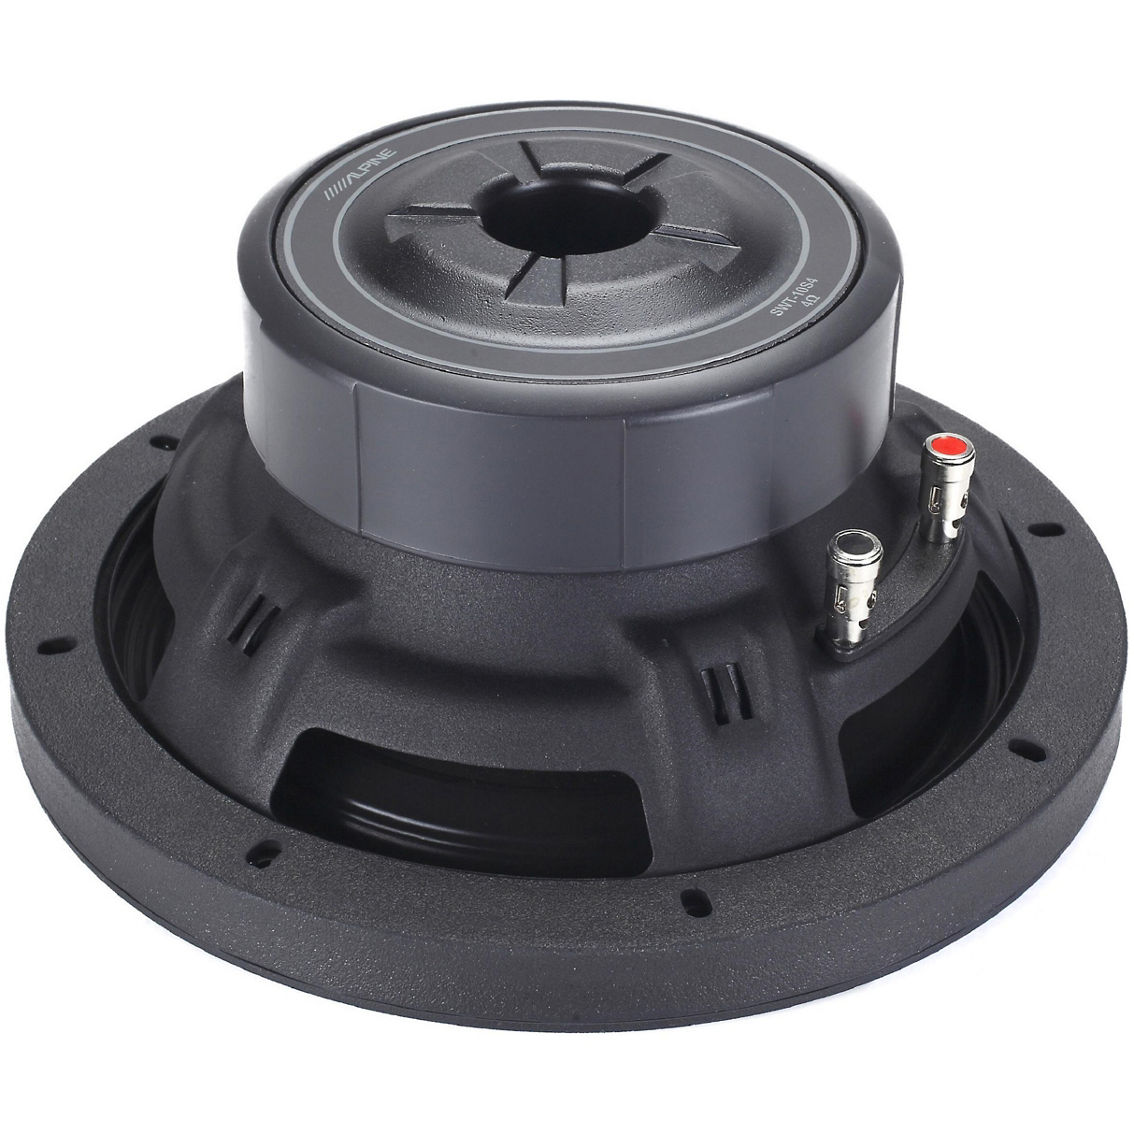 Alpine 10 in. Truck Subwoofer with 4-Ohm Voice Coil - Image 4 of 4